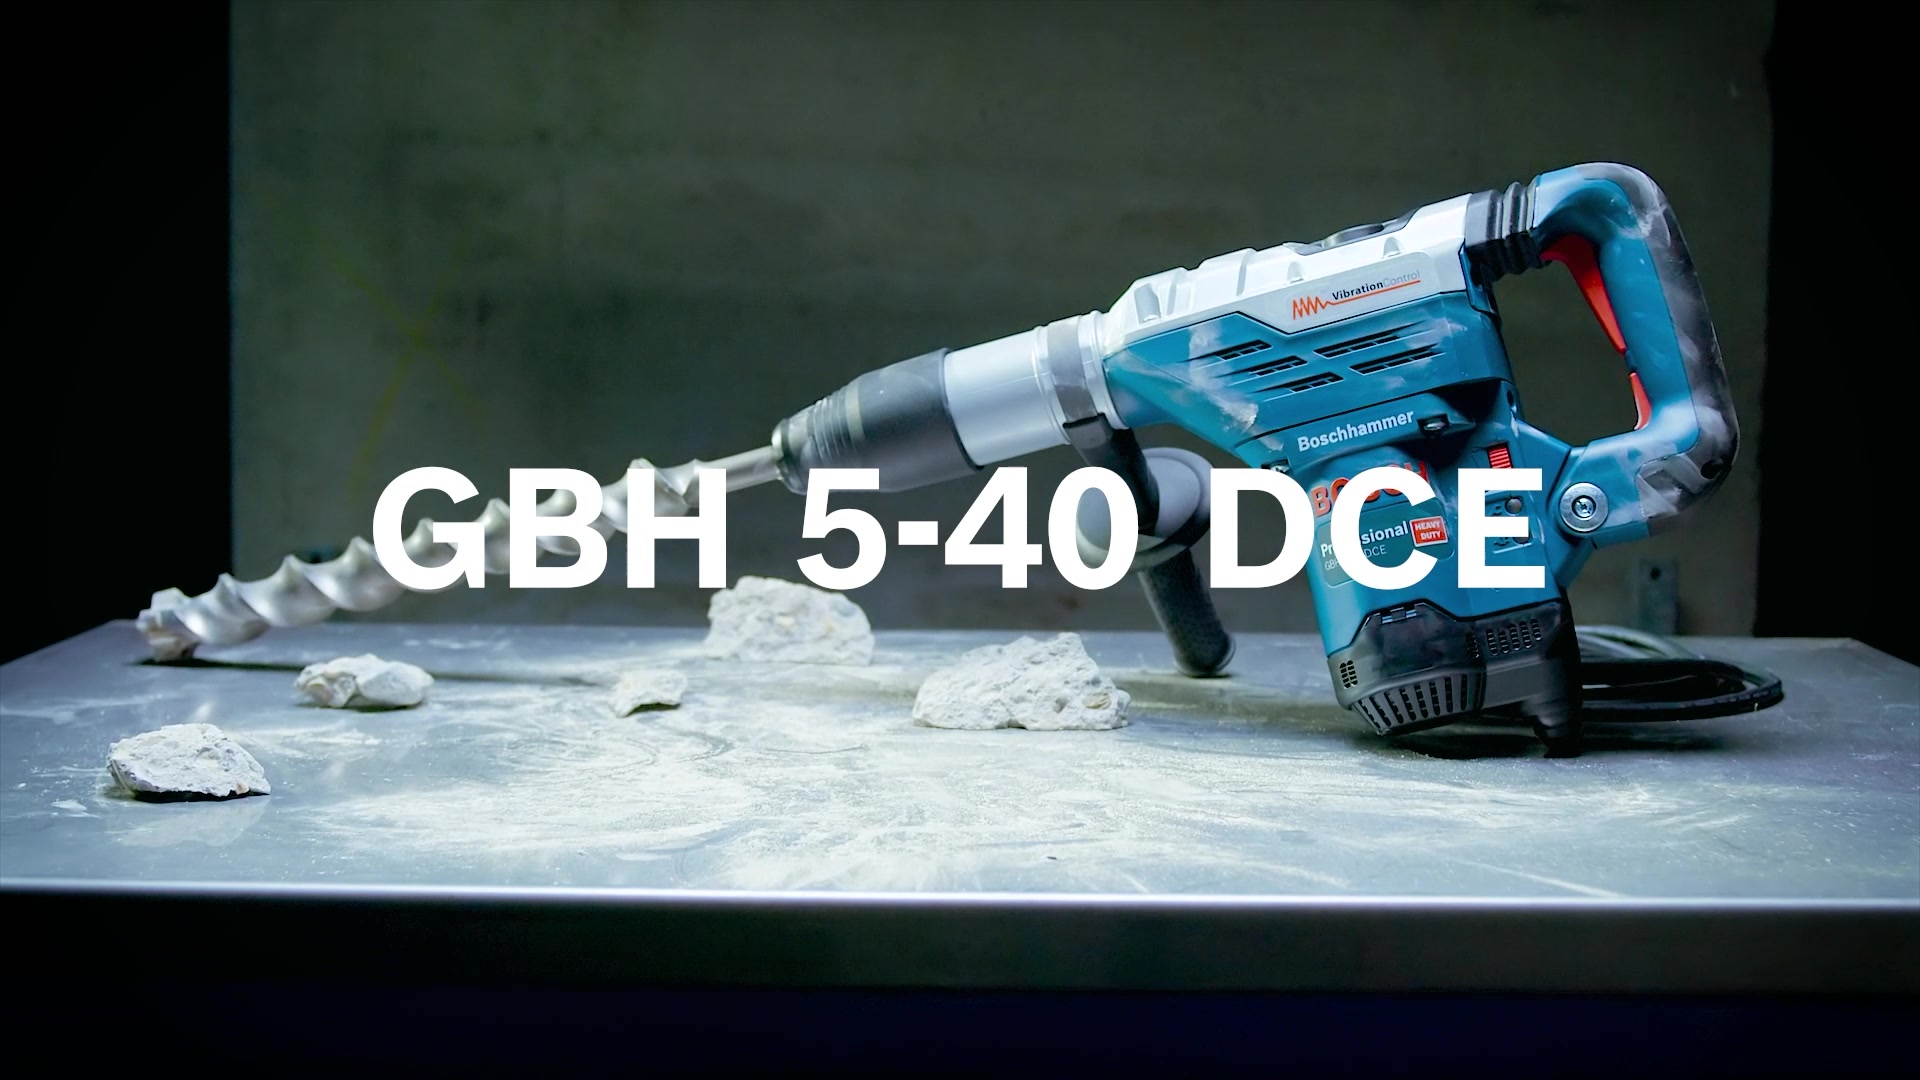 GBH 5-40 DCE with Professional | SDS Bosch max Hammer Rotary